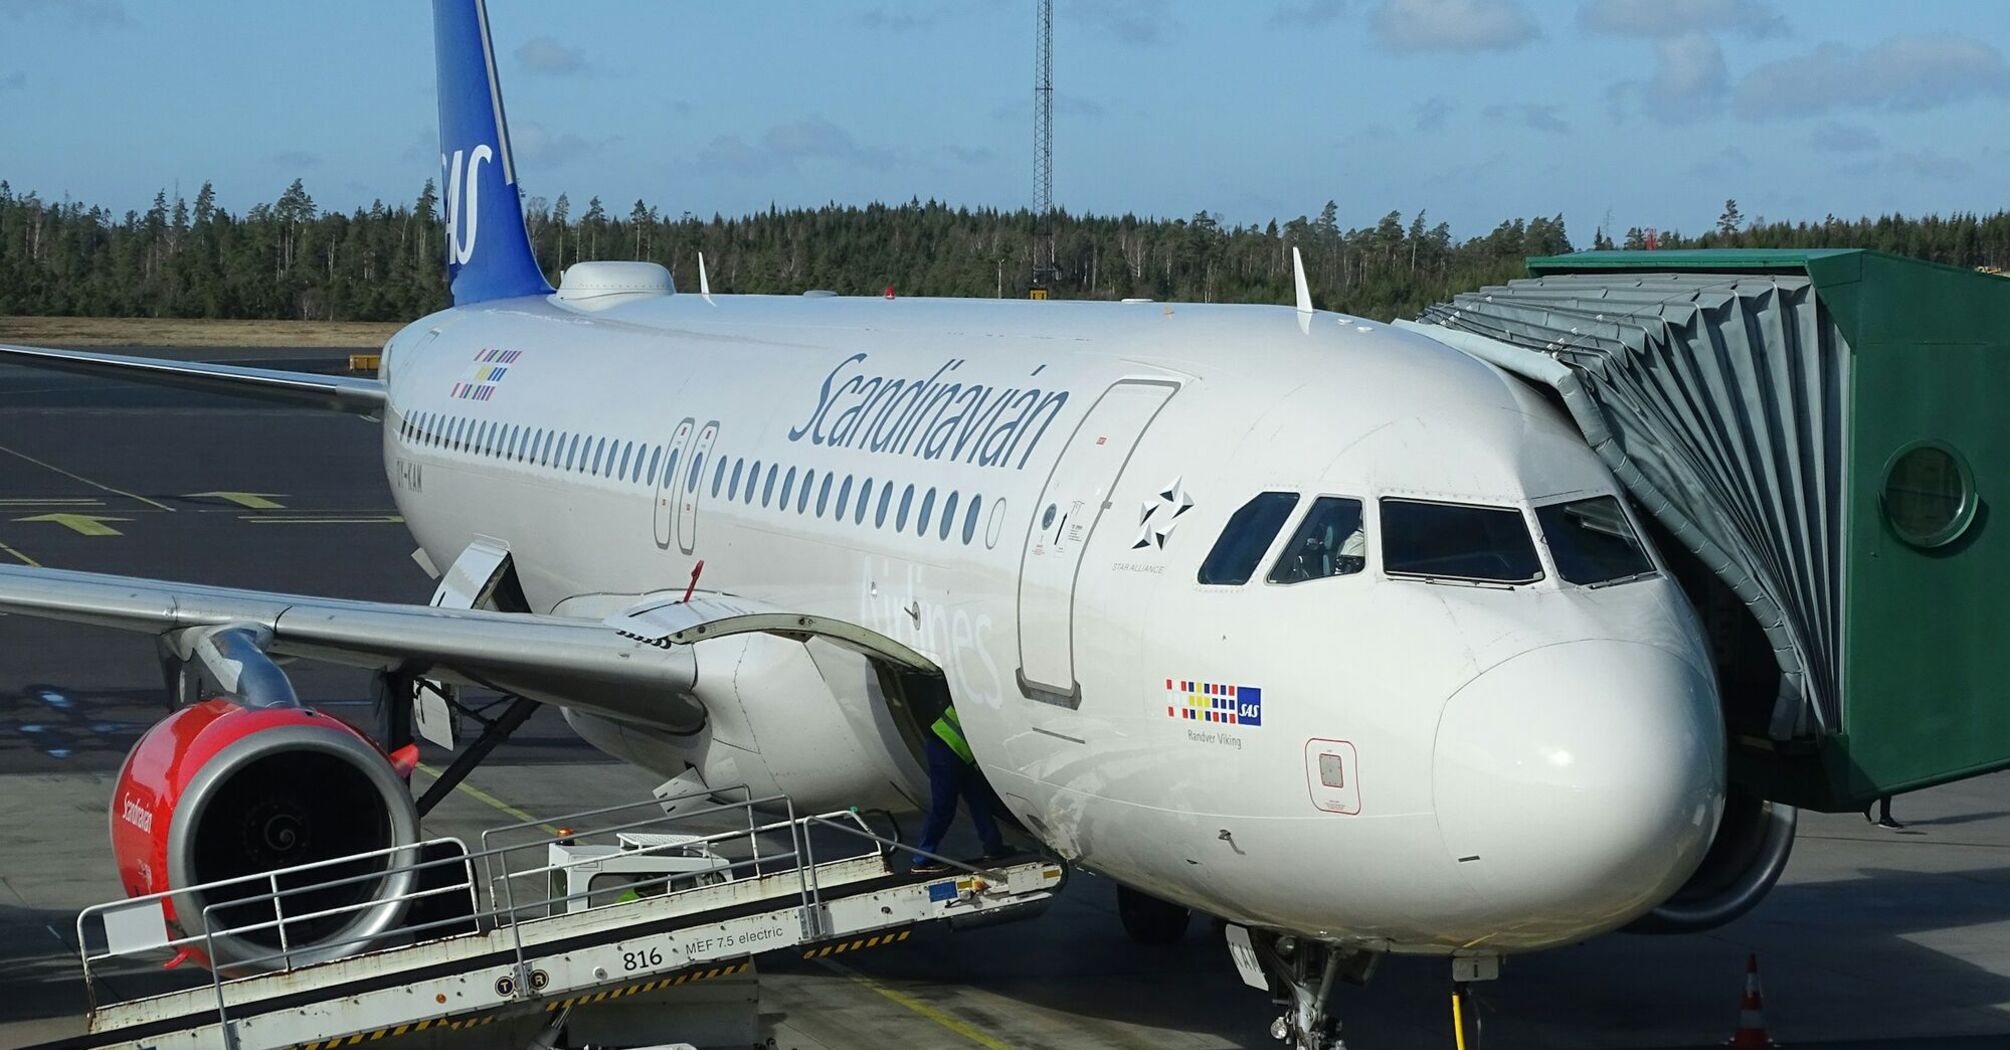 Scandinavian Airlines airplane docked at an airport terminal with jet bridge attached